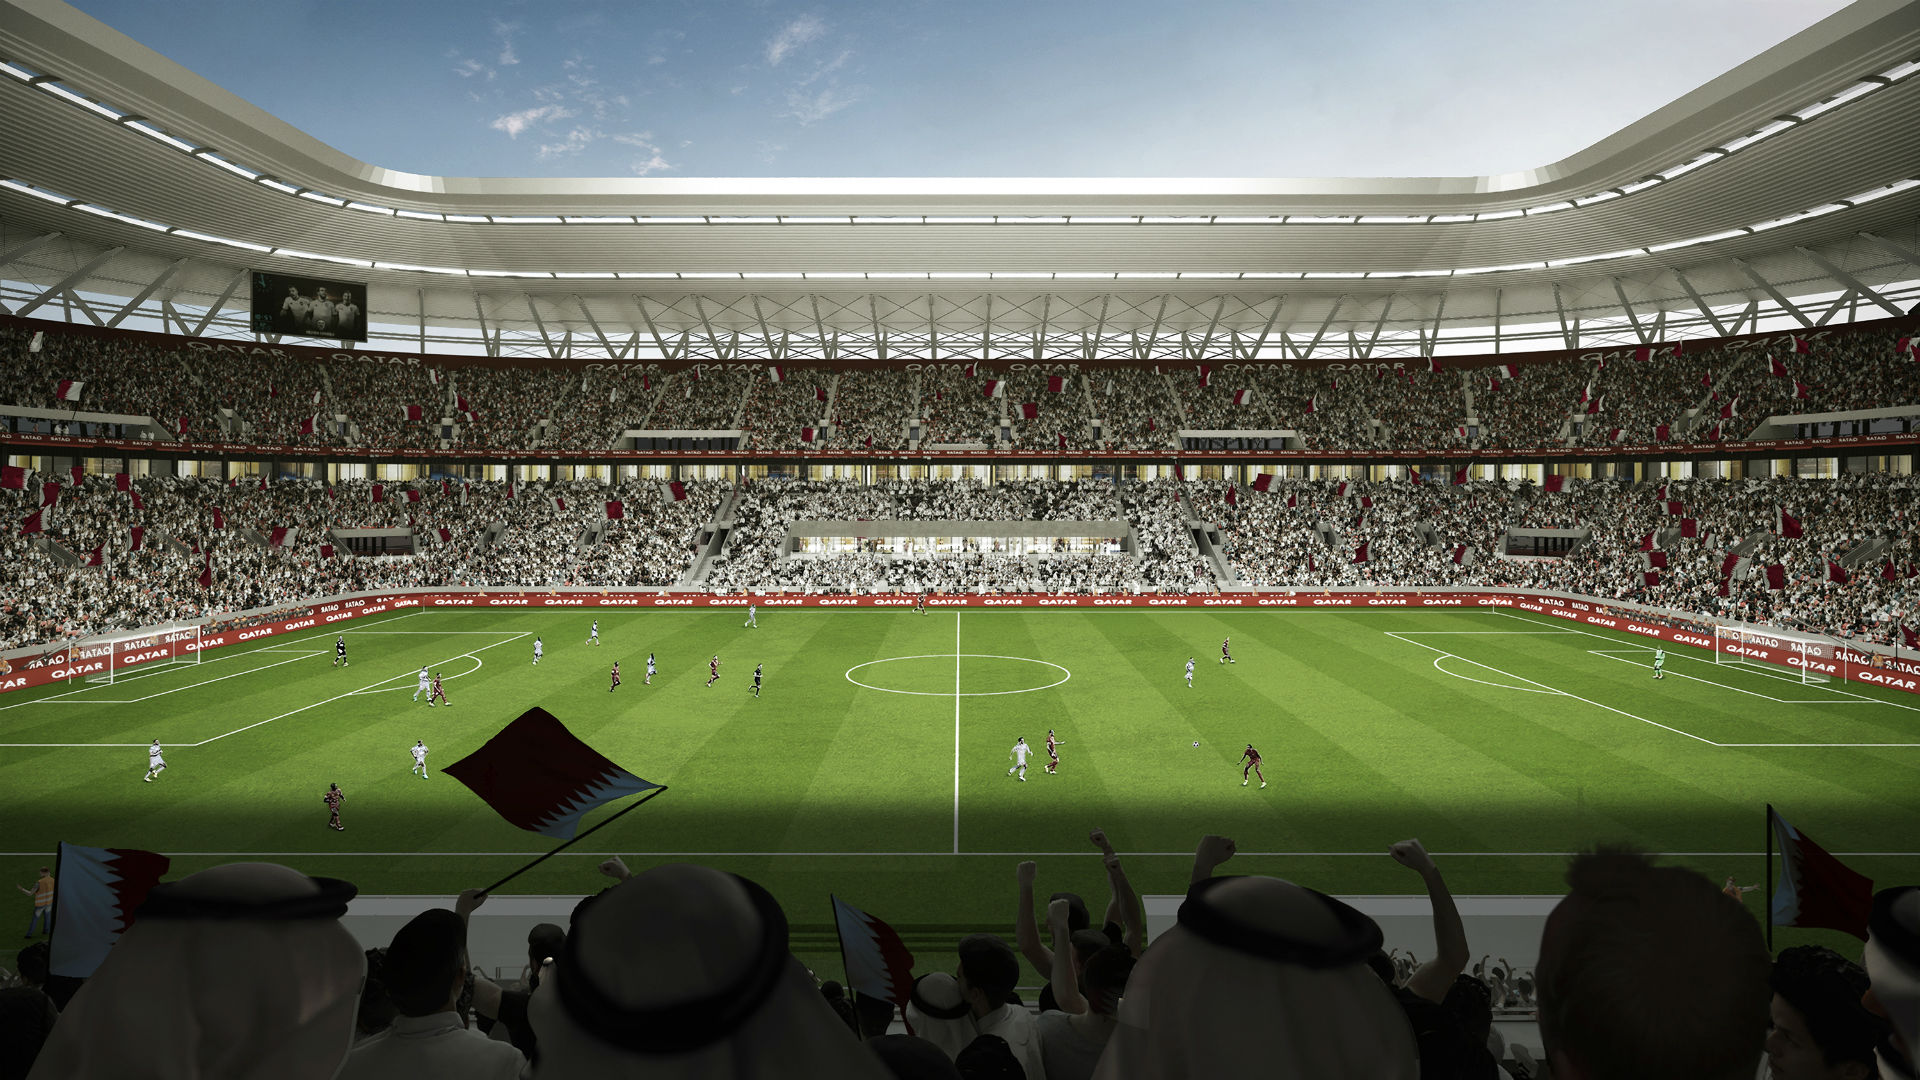 2022 World Cup Plans revealed for incredible ground breaking stadium 